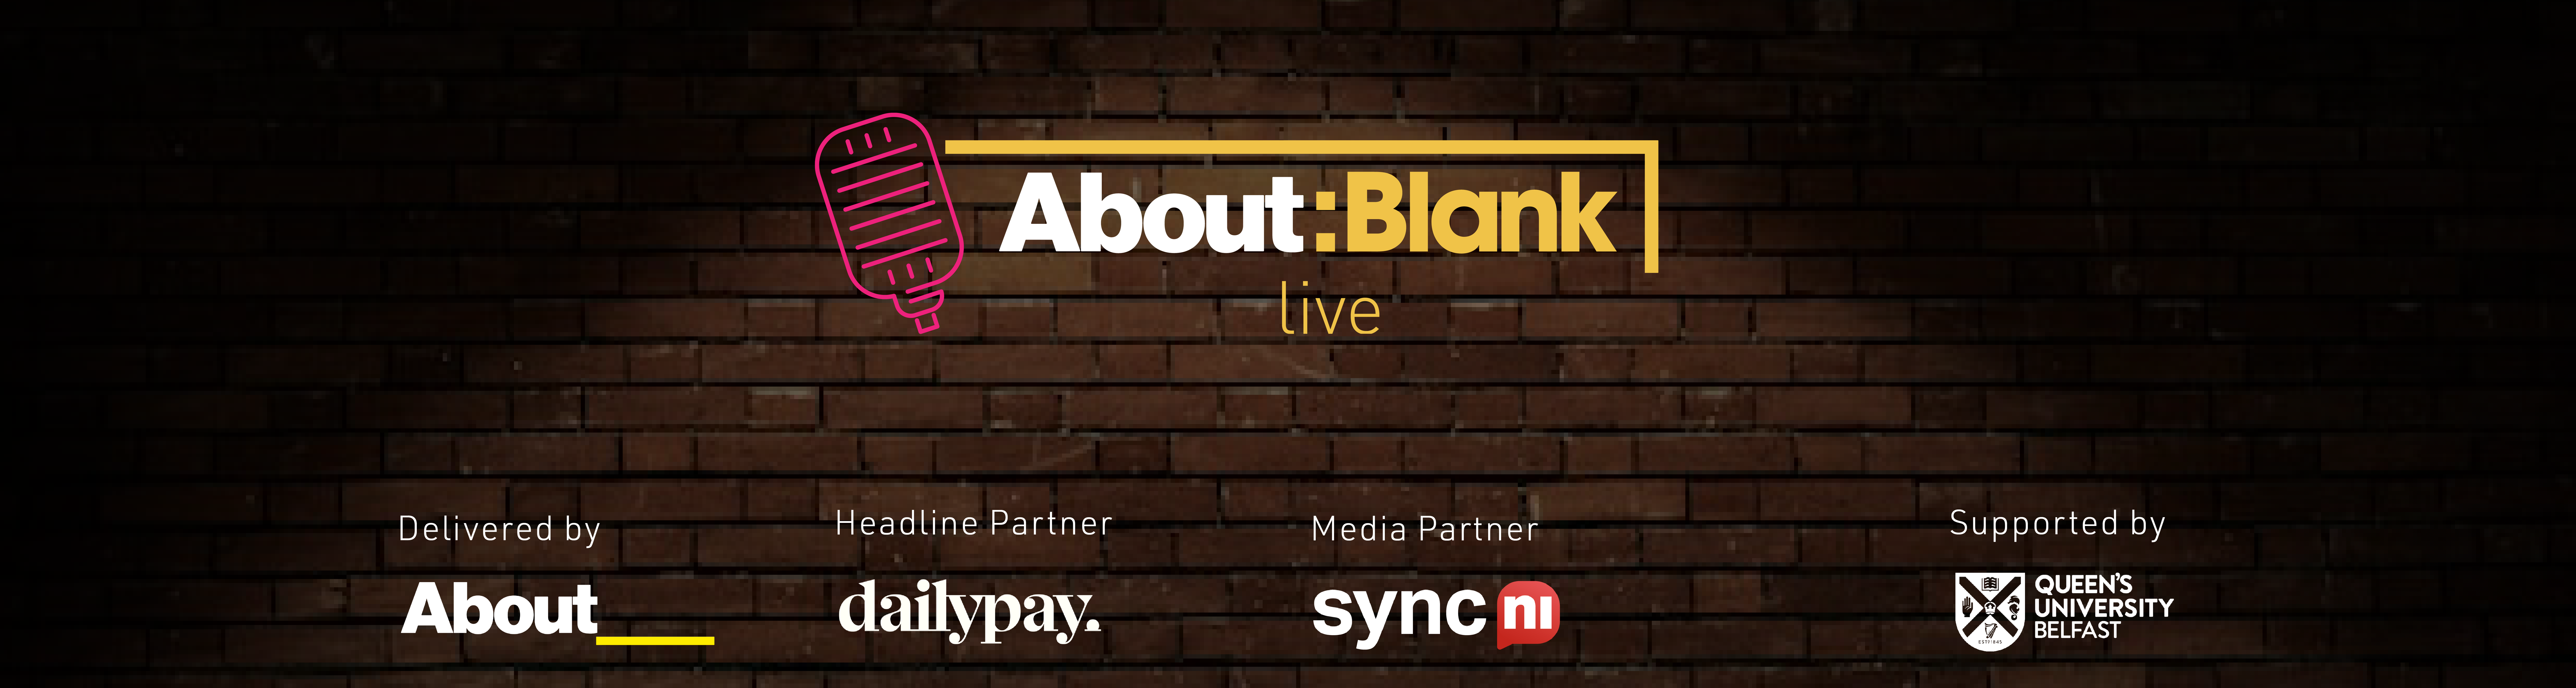 About Blank Live podcast banner with sponsors DailyPay, Queen's University, SyncNI and presented by About Blank